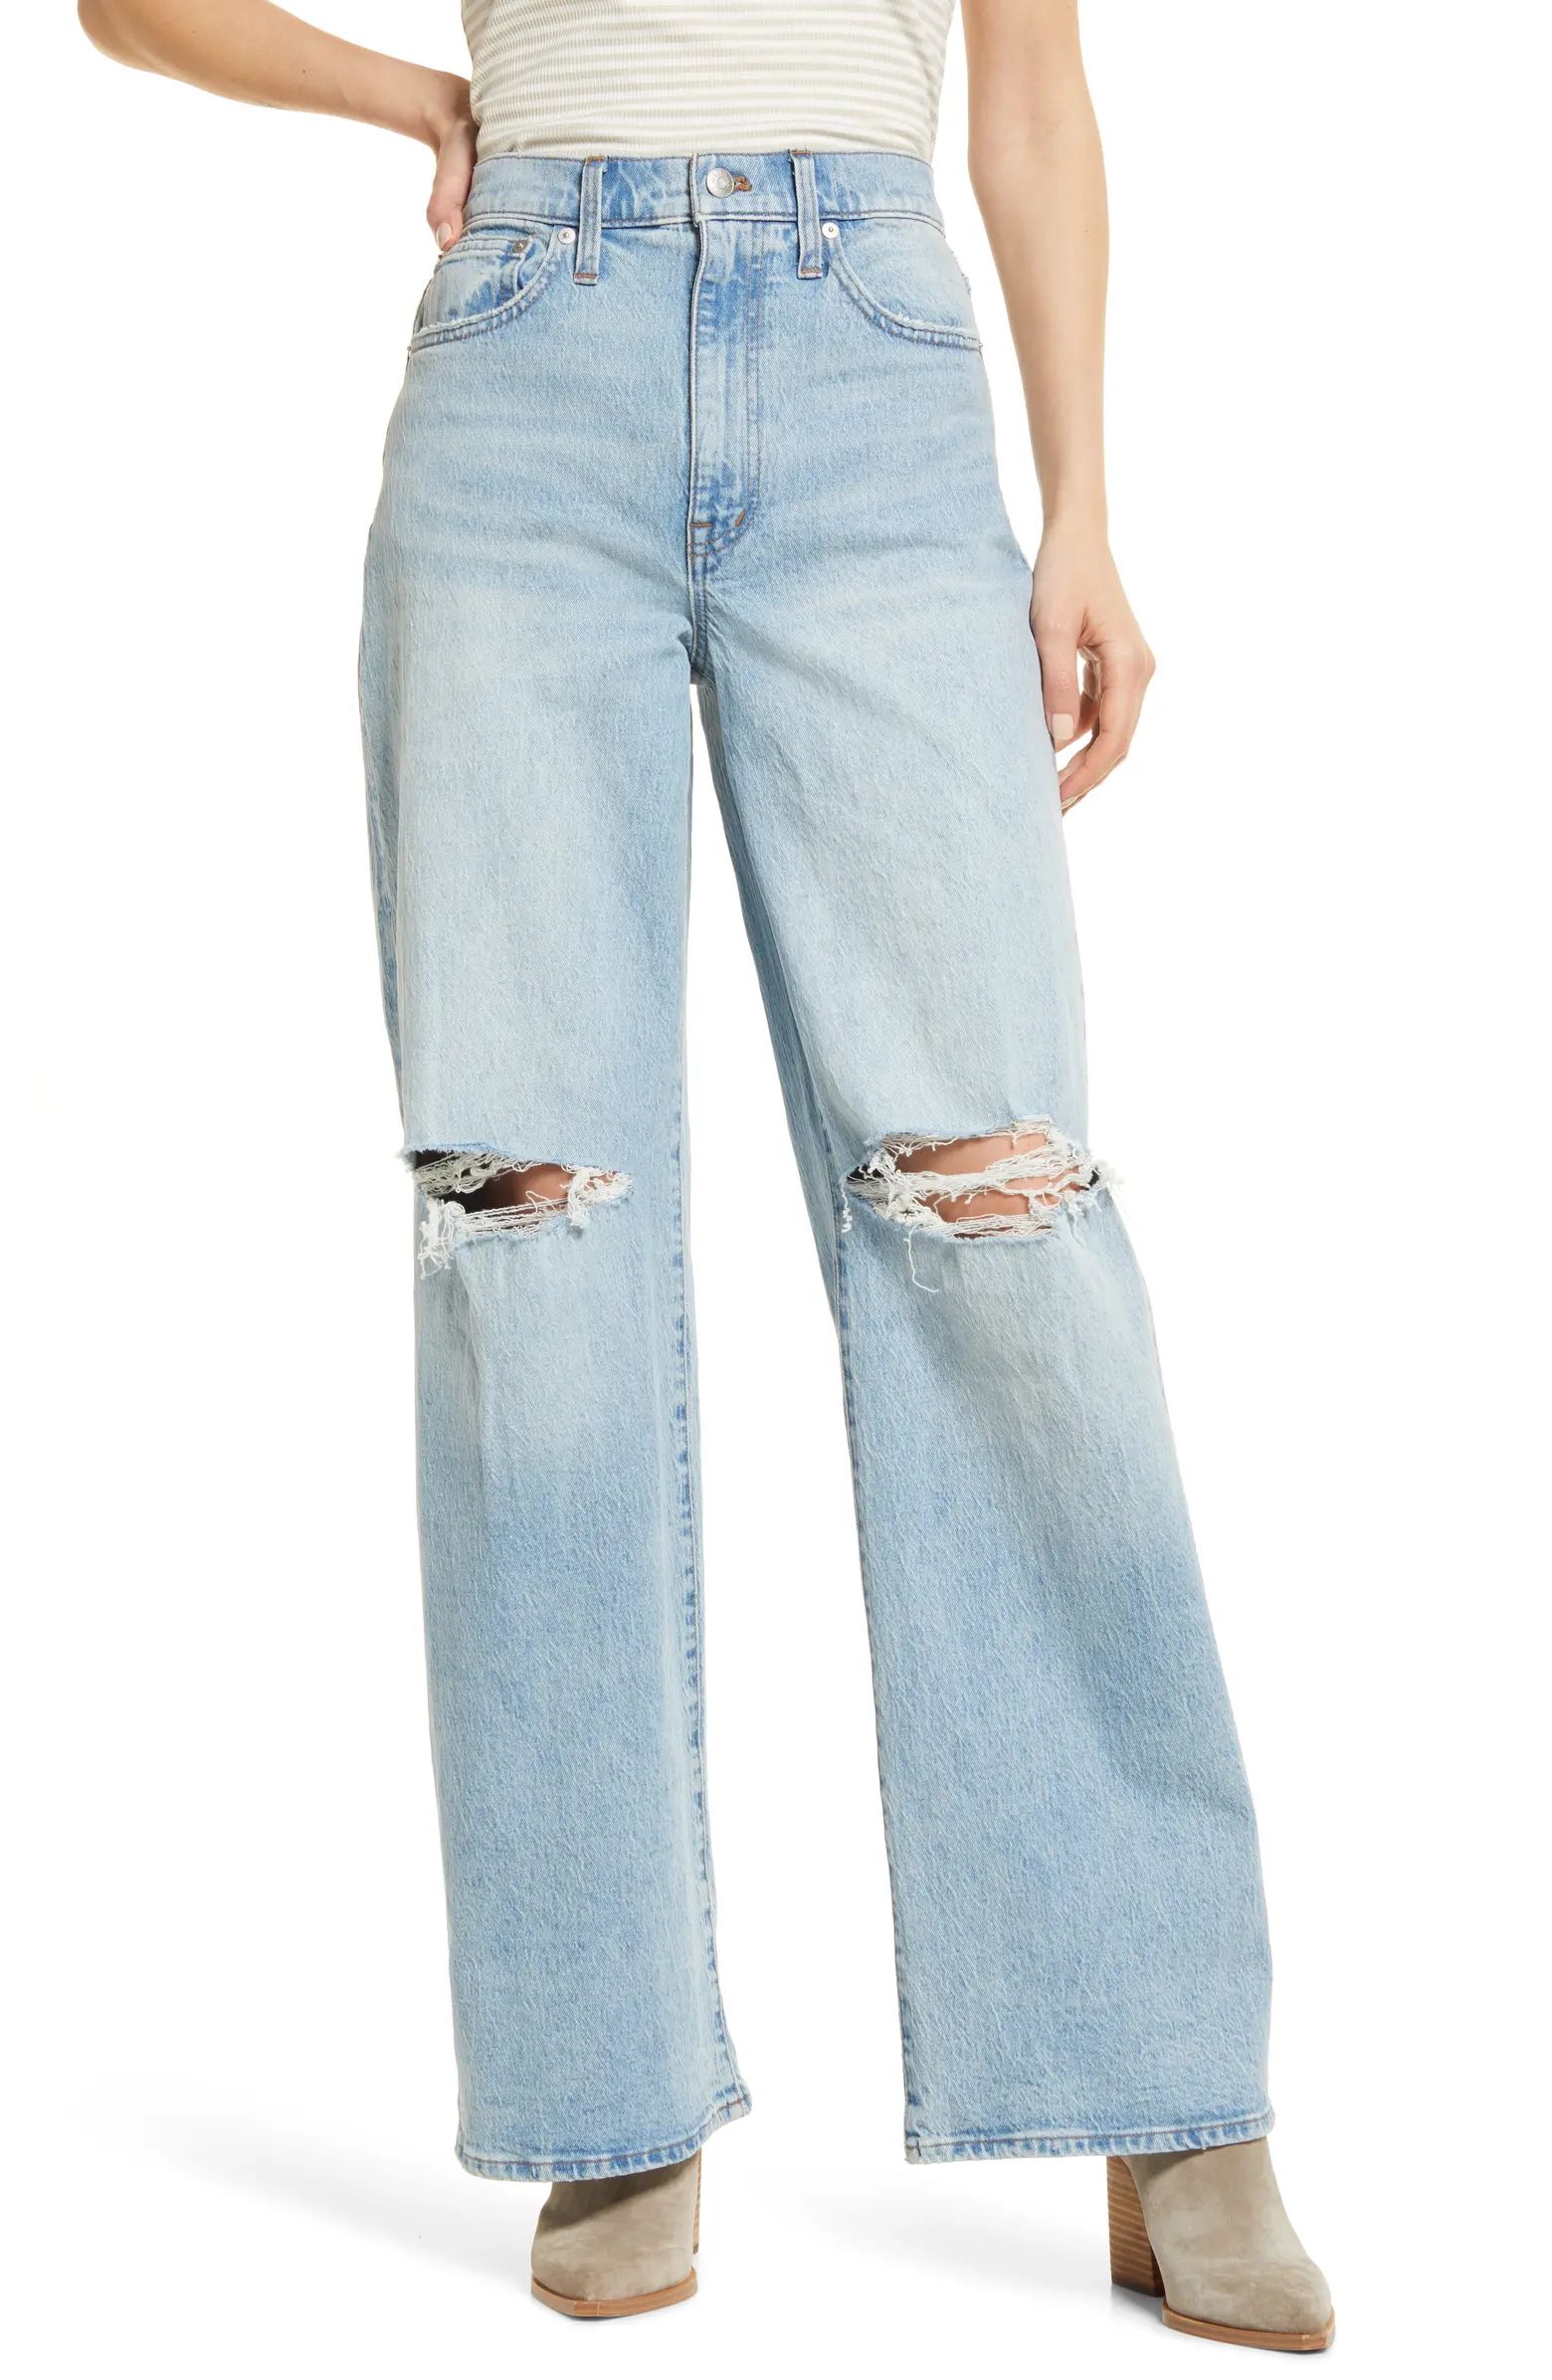 Madewell Women's Ripped High Waist Superwide Leg Jeans | Nordstrom | Nordstrom